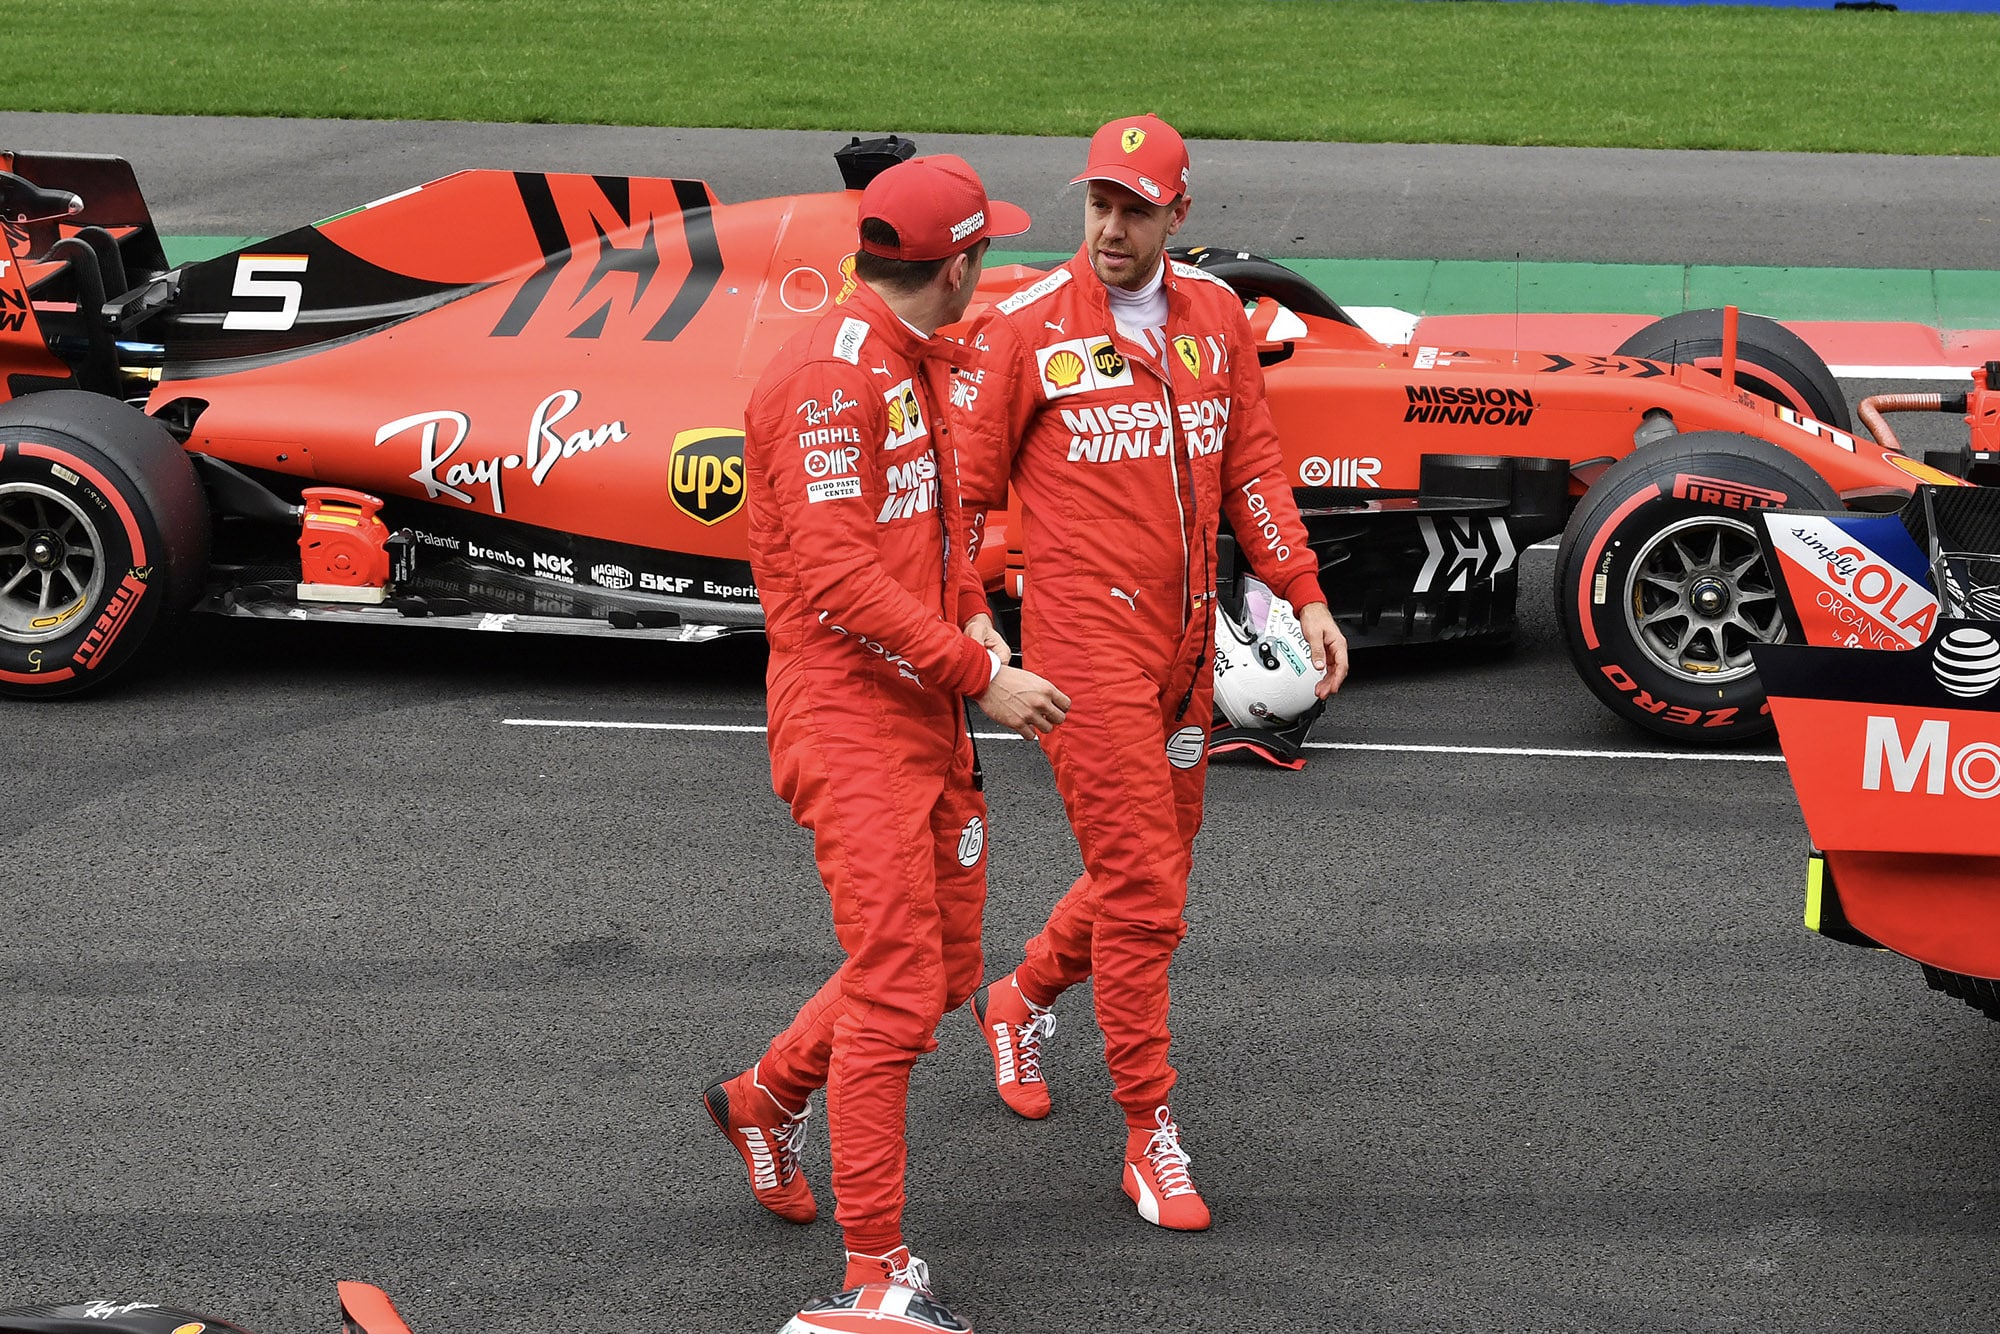 Sebastian Vettel and Charles Leclerc talk after qualifying for the 2019 F1 Mexican Grand Prix